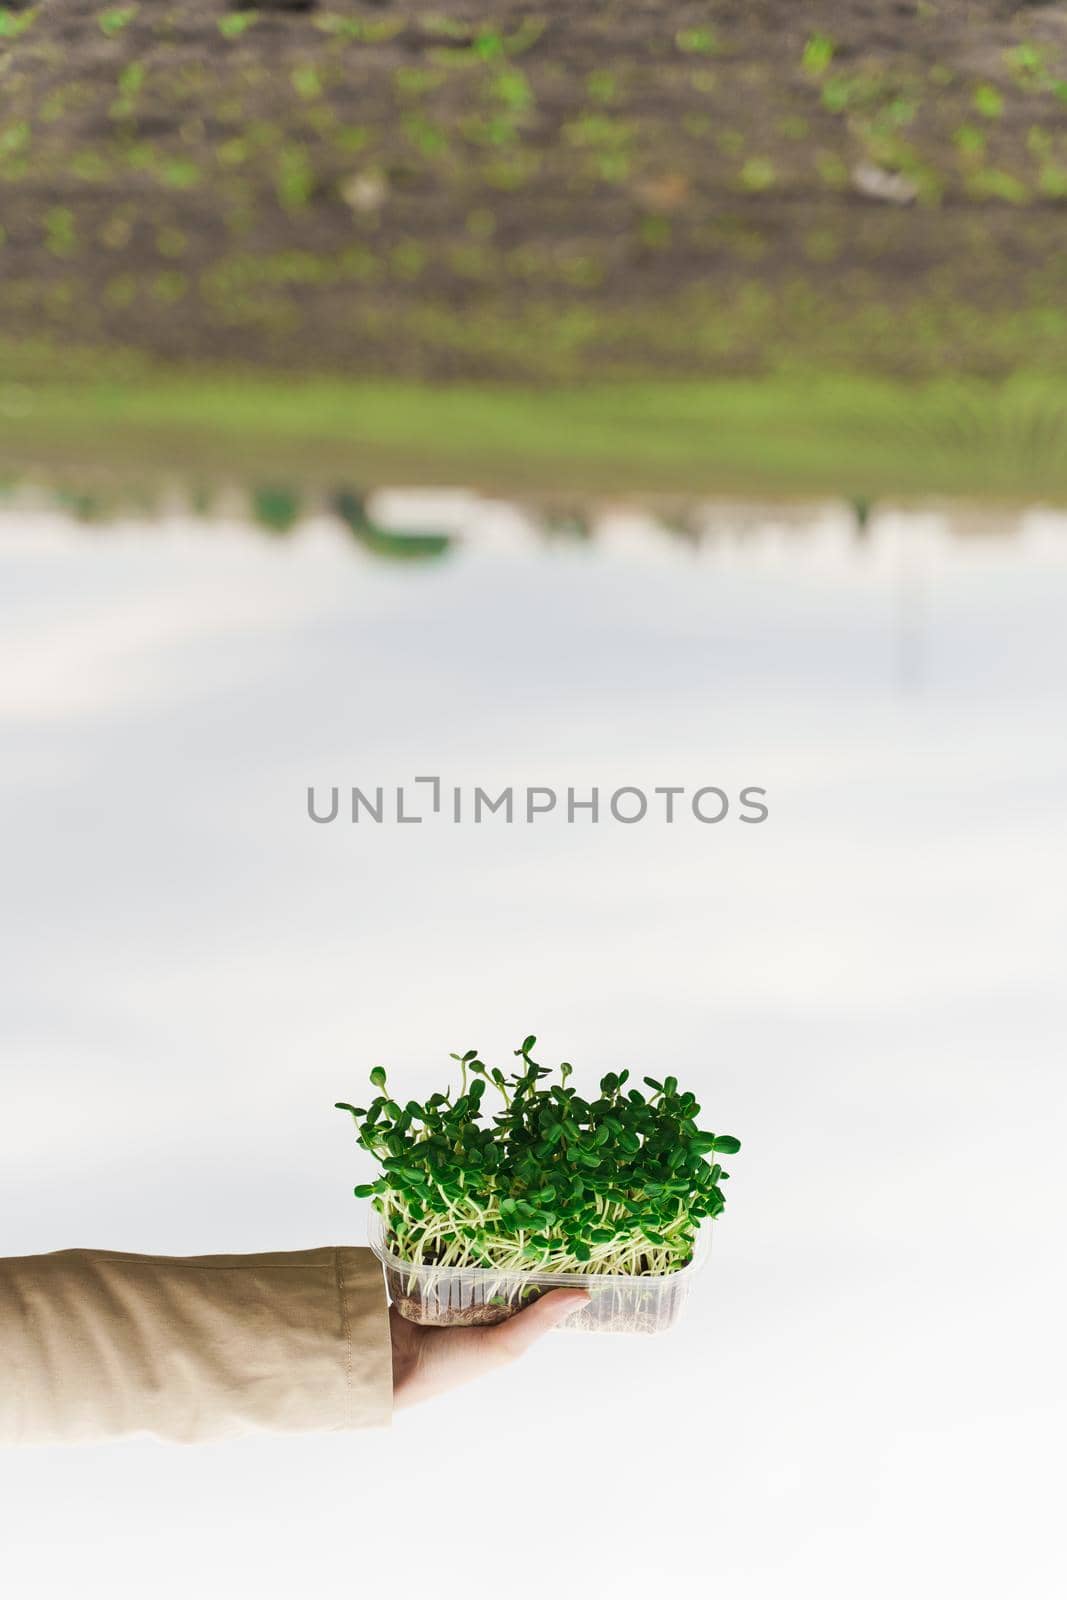 Microgreen of sunflower seeds in hands. creative upside down photo. Idea for healthy vegan green microgreen advert. Vegeterian food delivery service by Rabizo